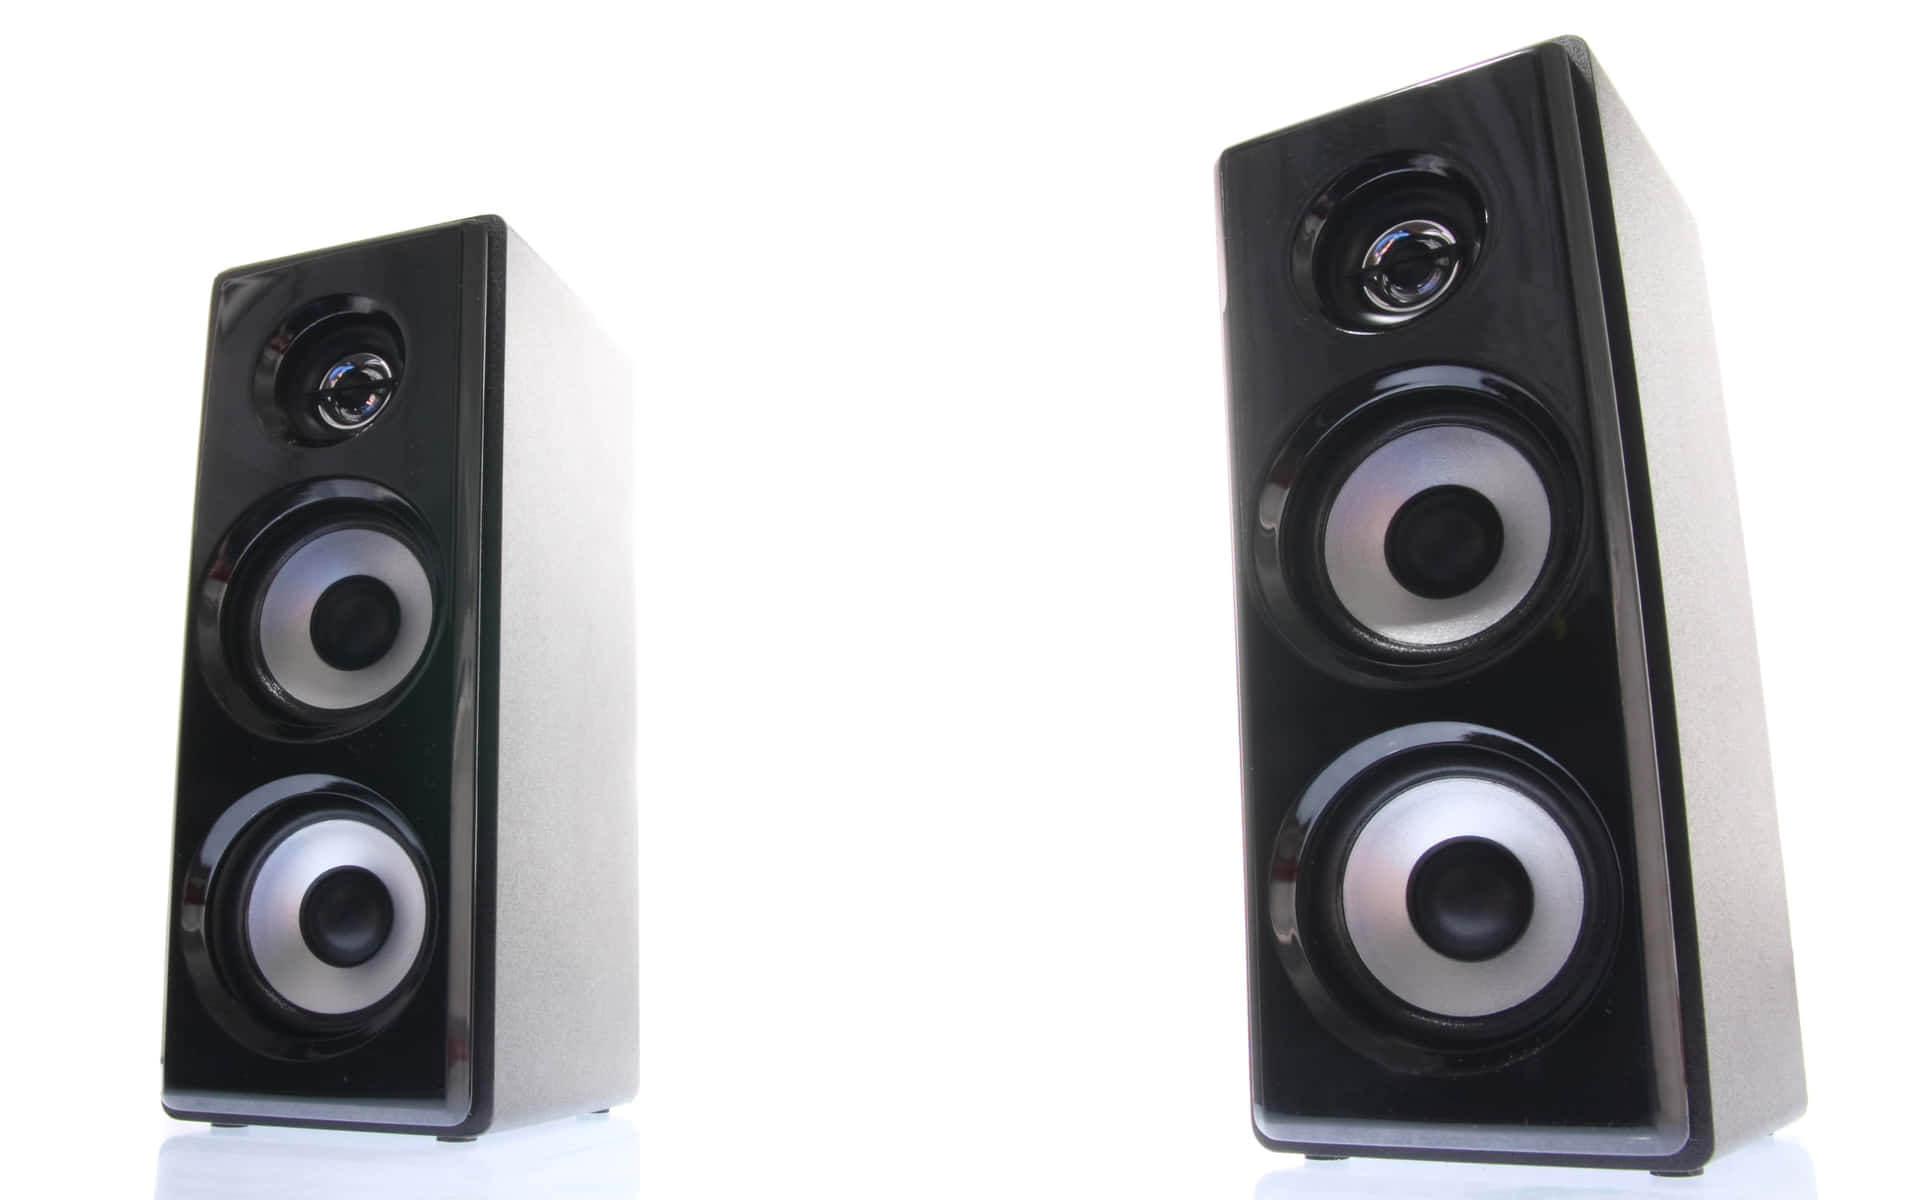 Speaker in Focus: A Close-up view of a professional audio speaker